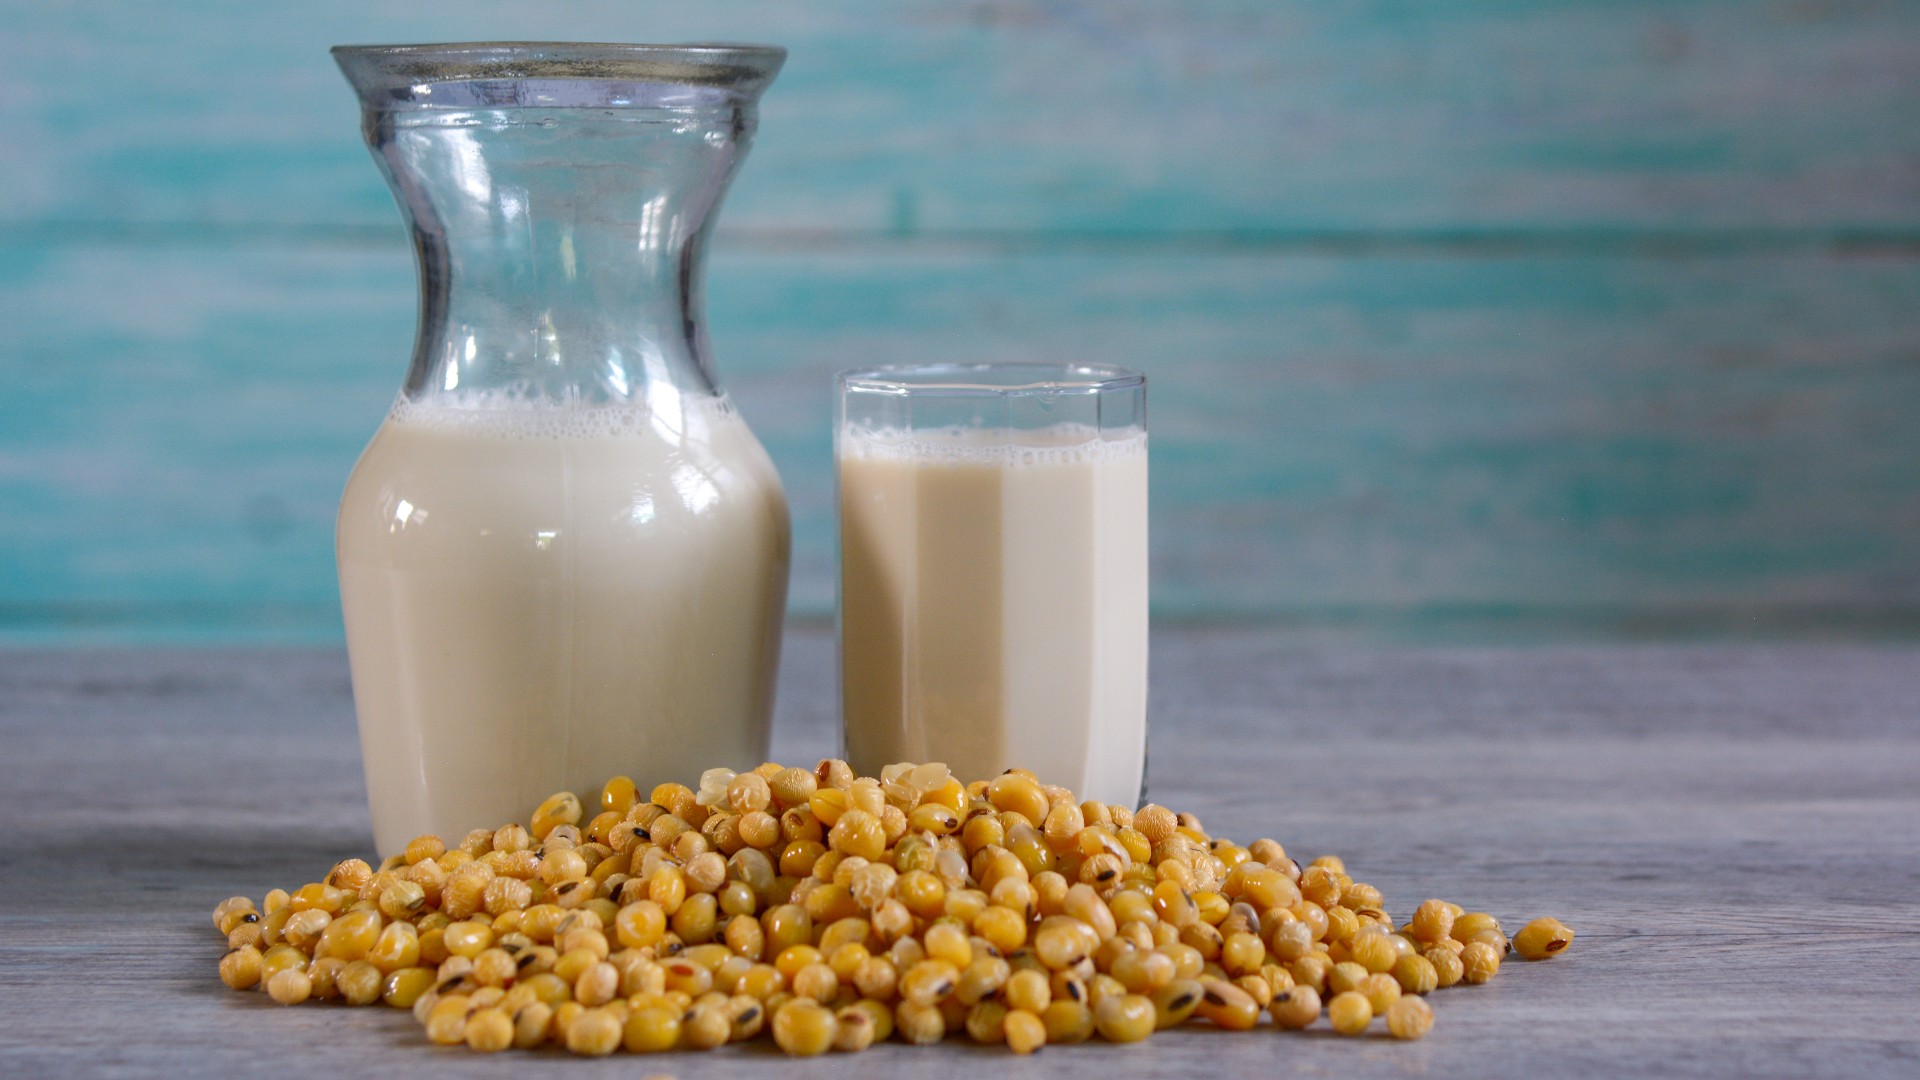 Soy milk in a bottle and glass with soybeans on top